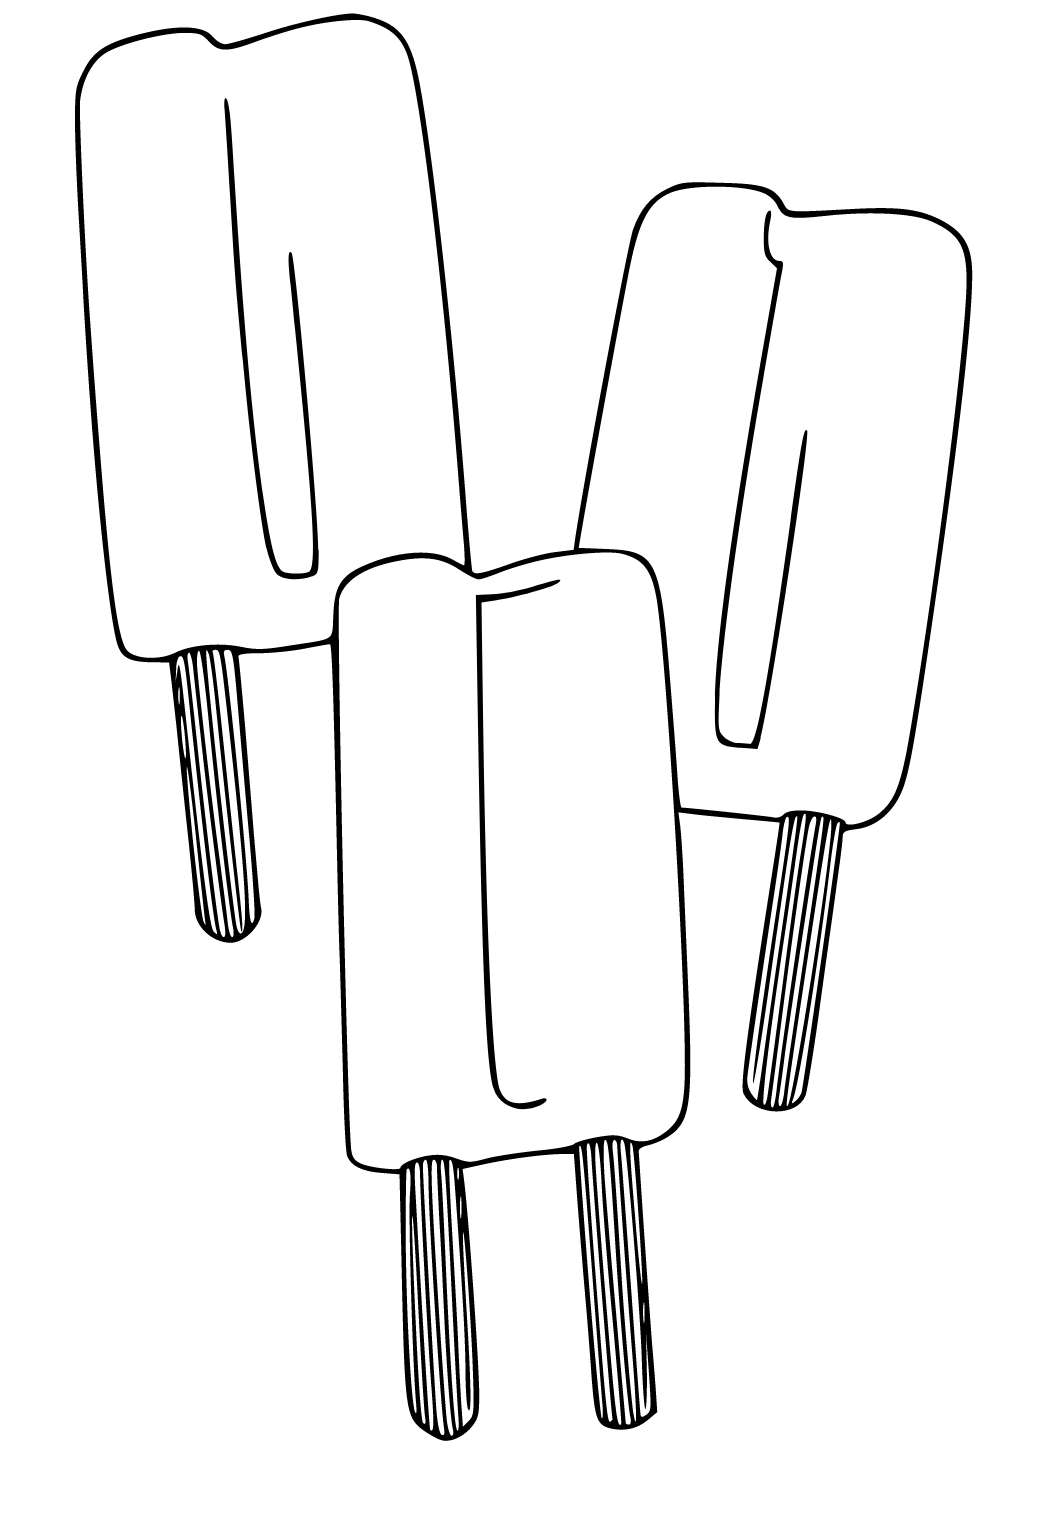 Free printable popsicle kit coloring page for adults and kids